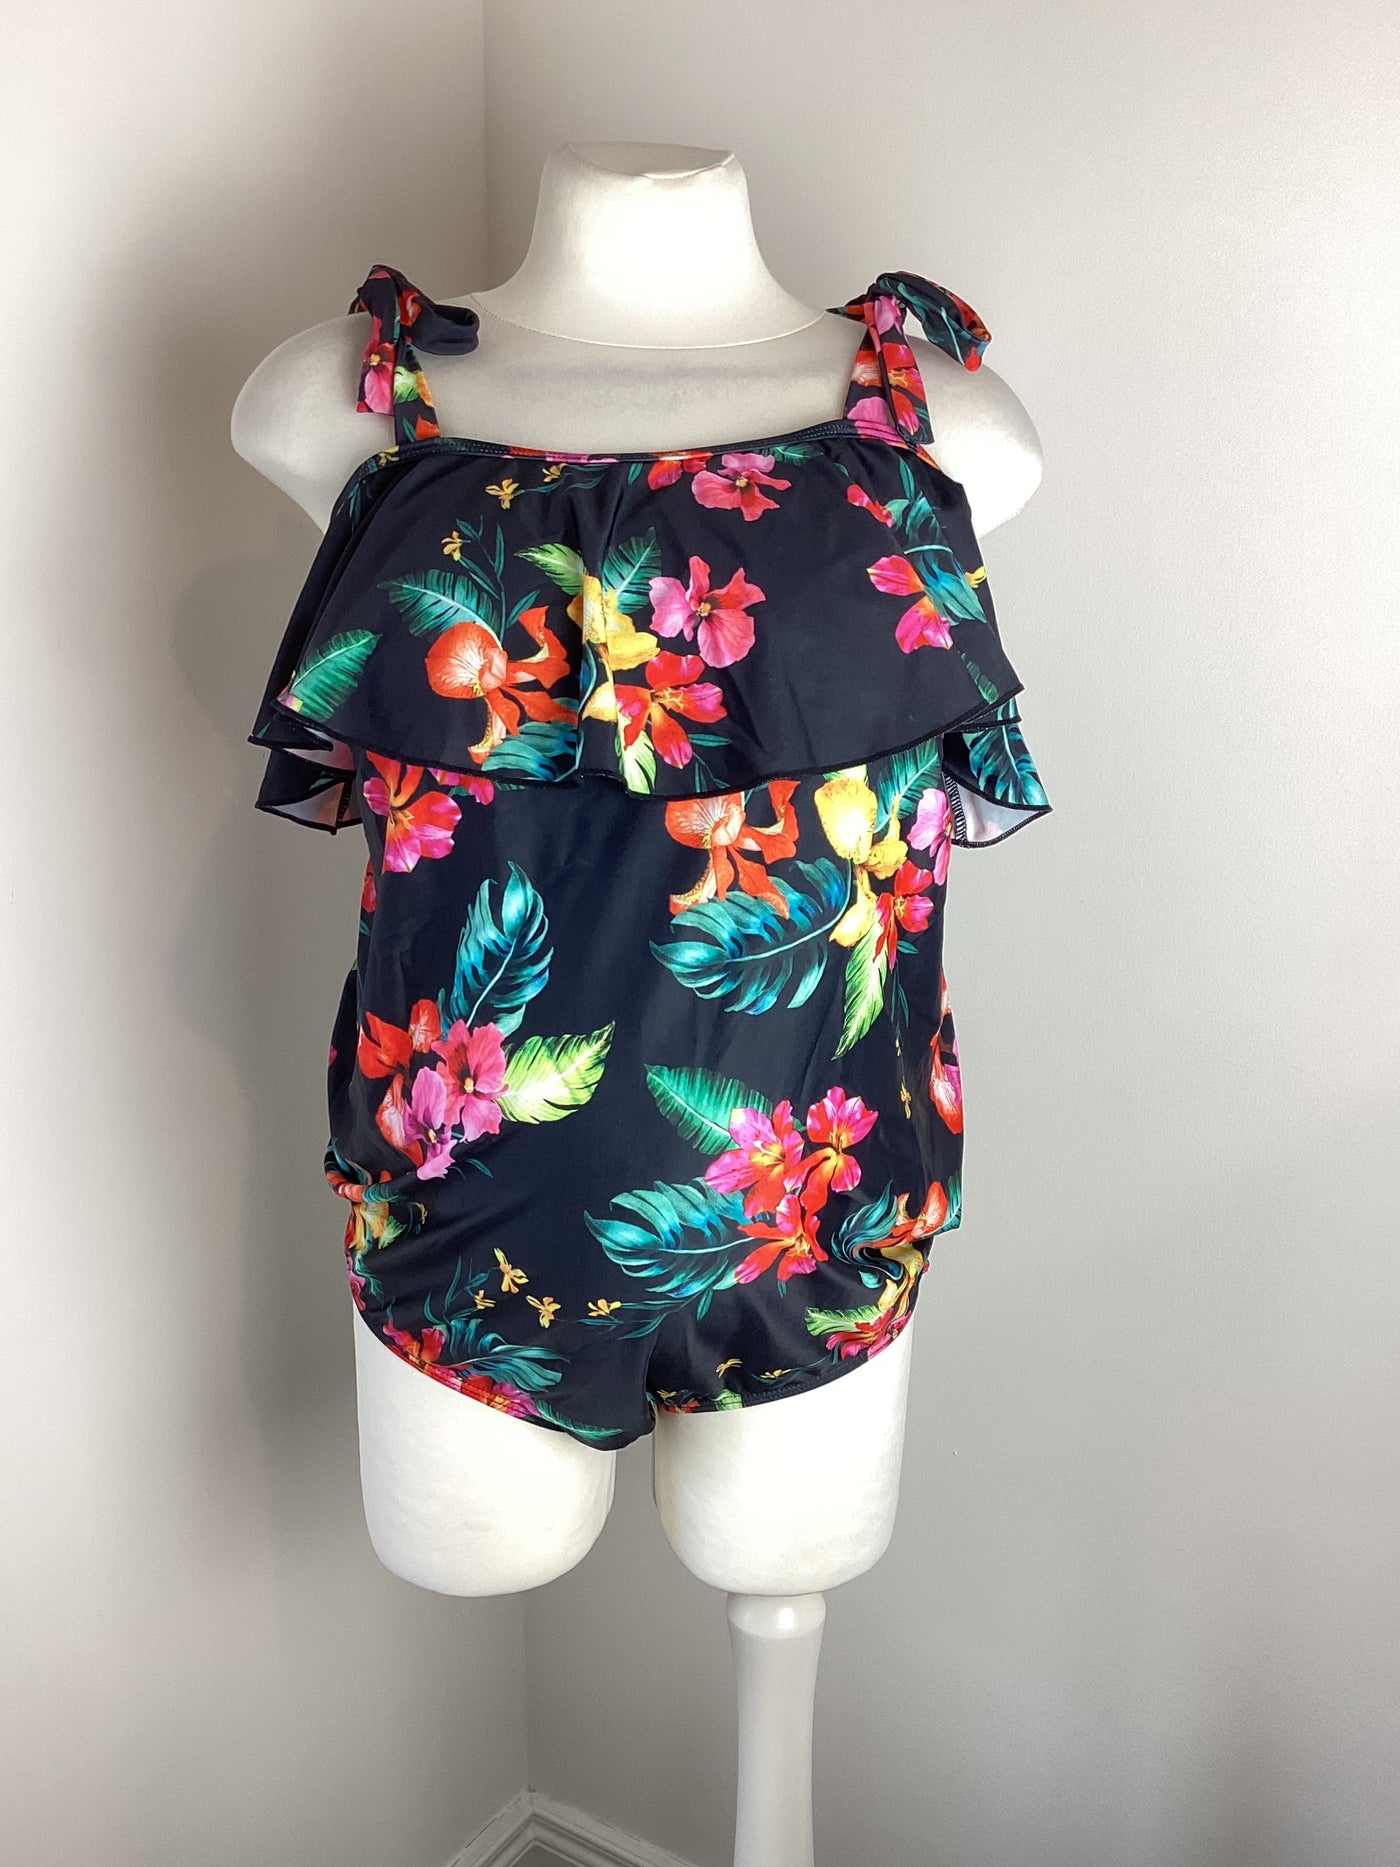 Bump It Up Maternity black, red & pink floral swimsuit with frill top - Size 18/20